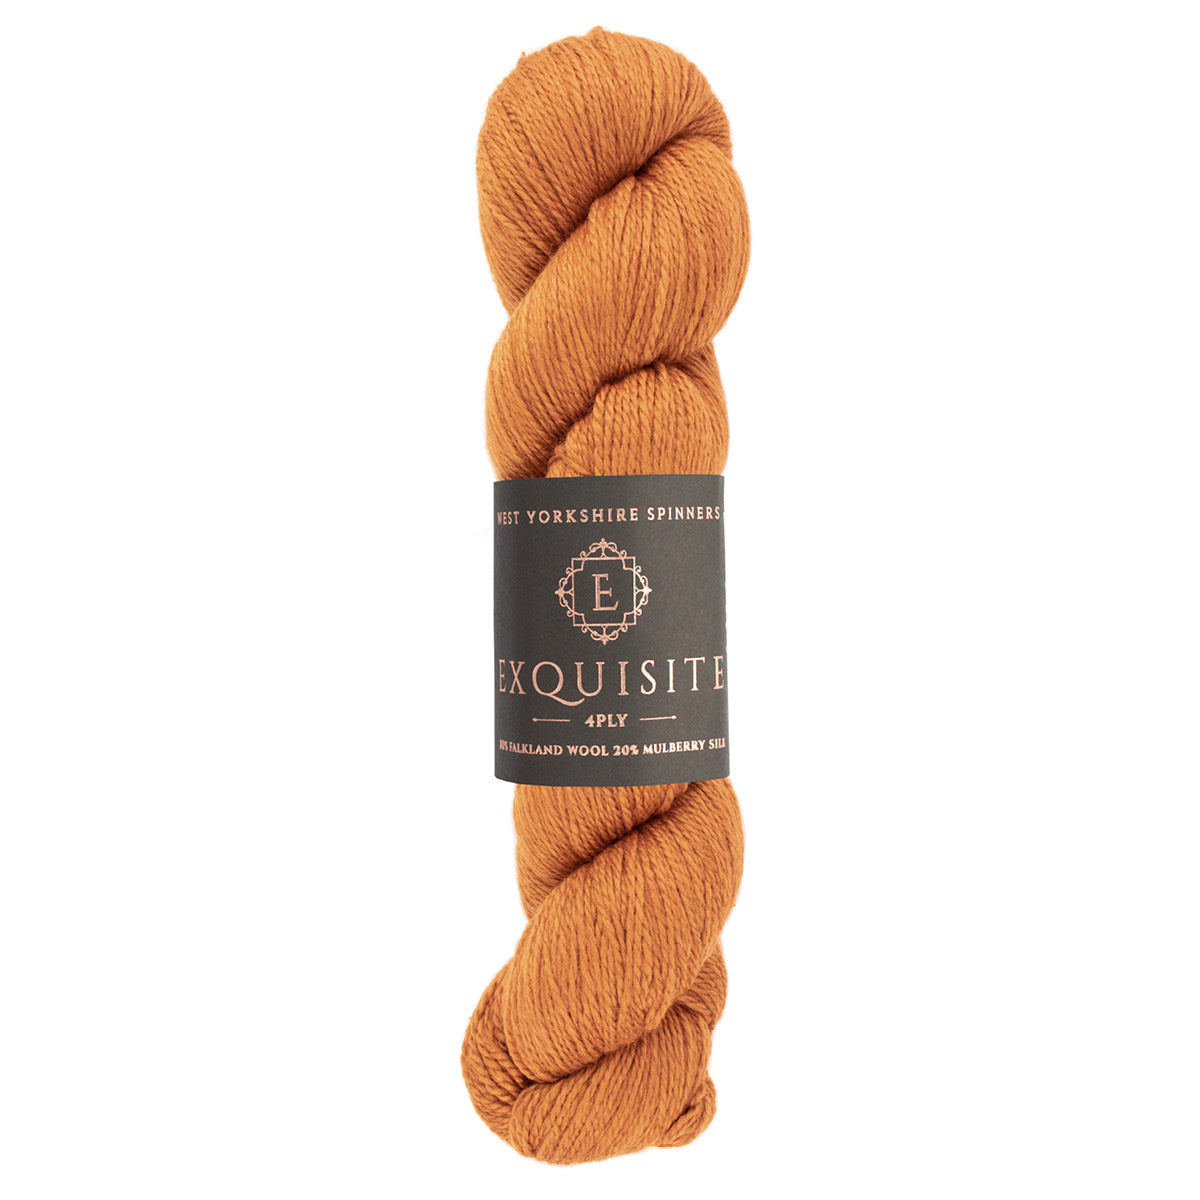 West Yorkshire Spinners Exquisite 4 ply